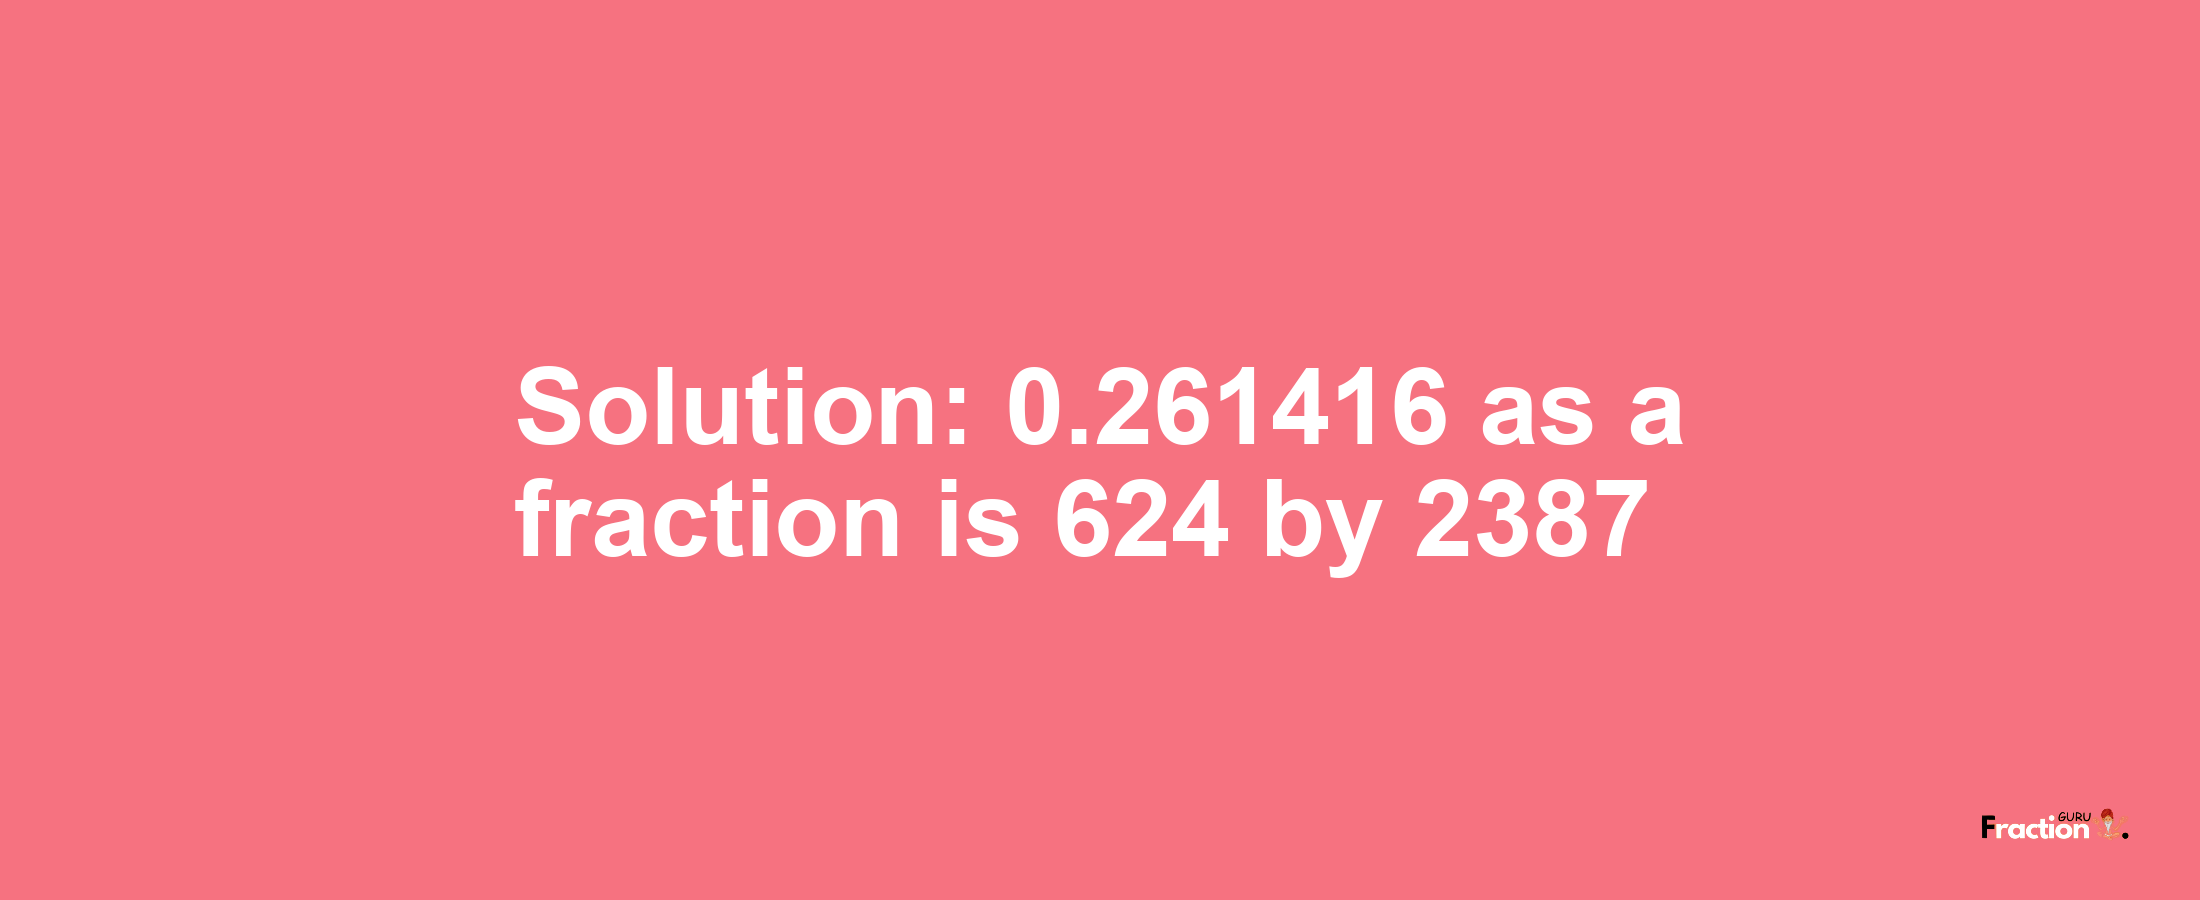 Solution:0.261416 as a fraction is 624/2387